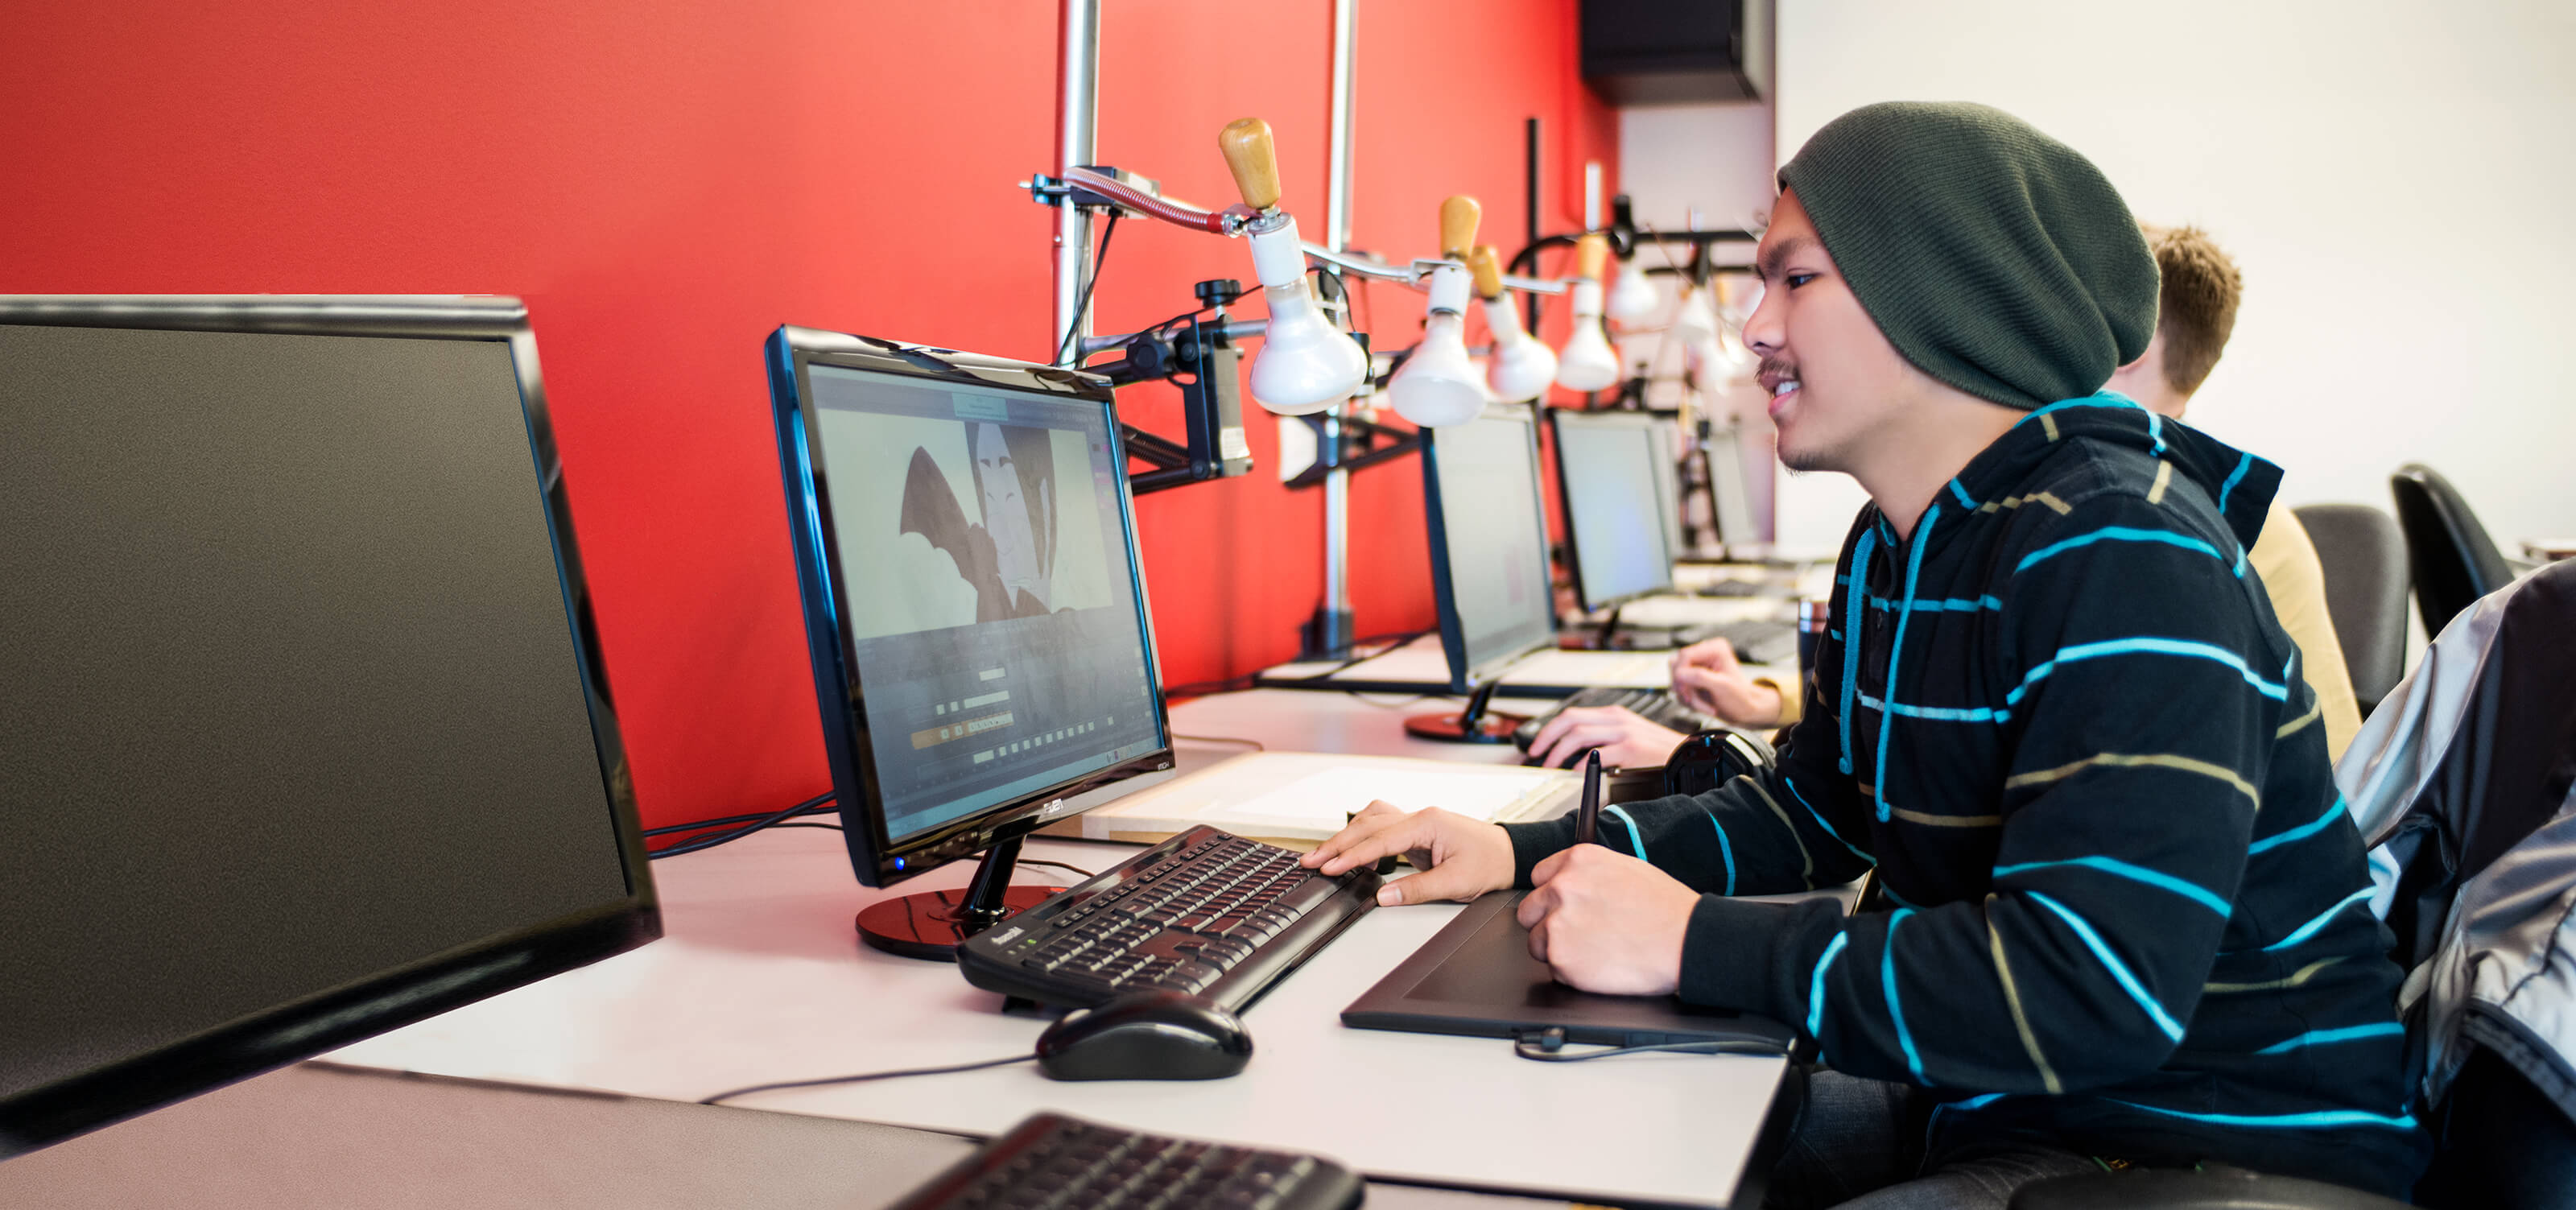 A DigiPen student smiling as he works on a computer animation